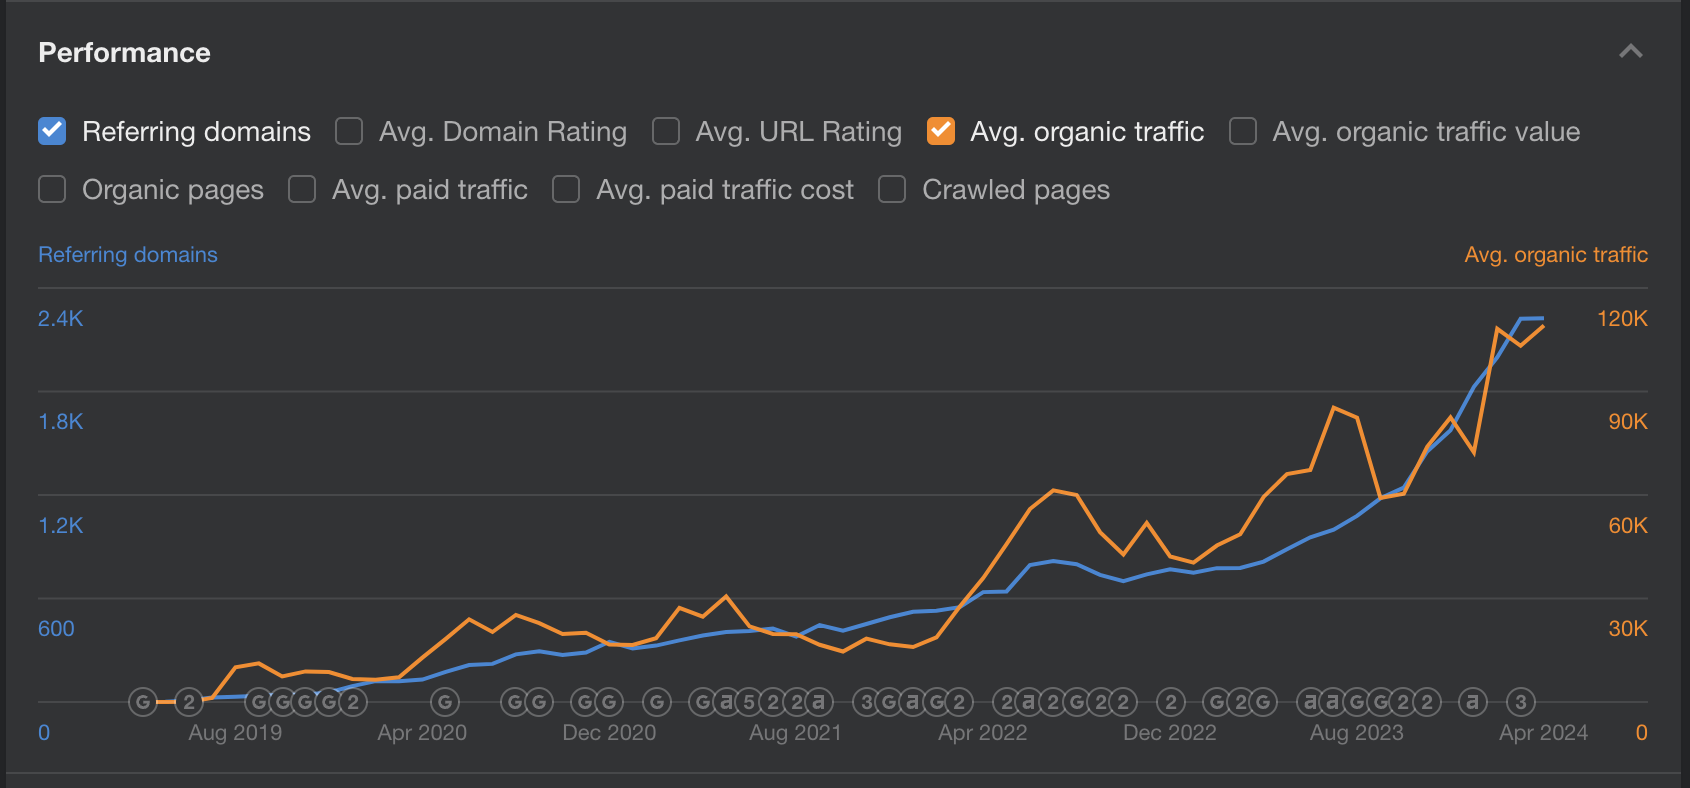 organic traffic and referring domains